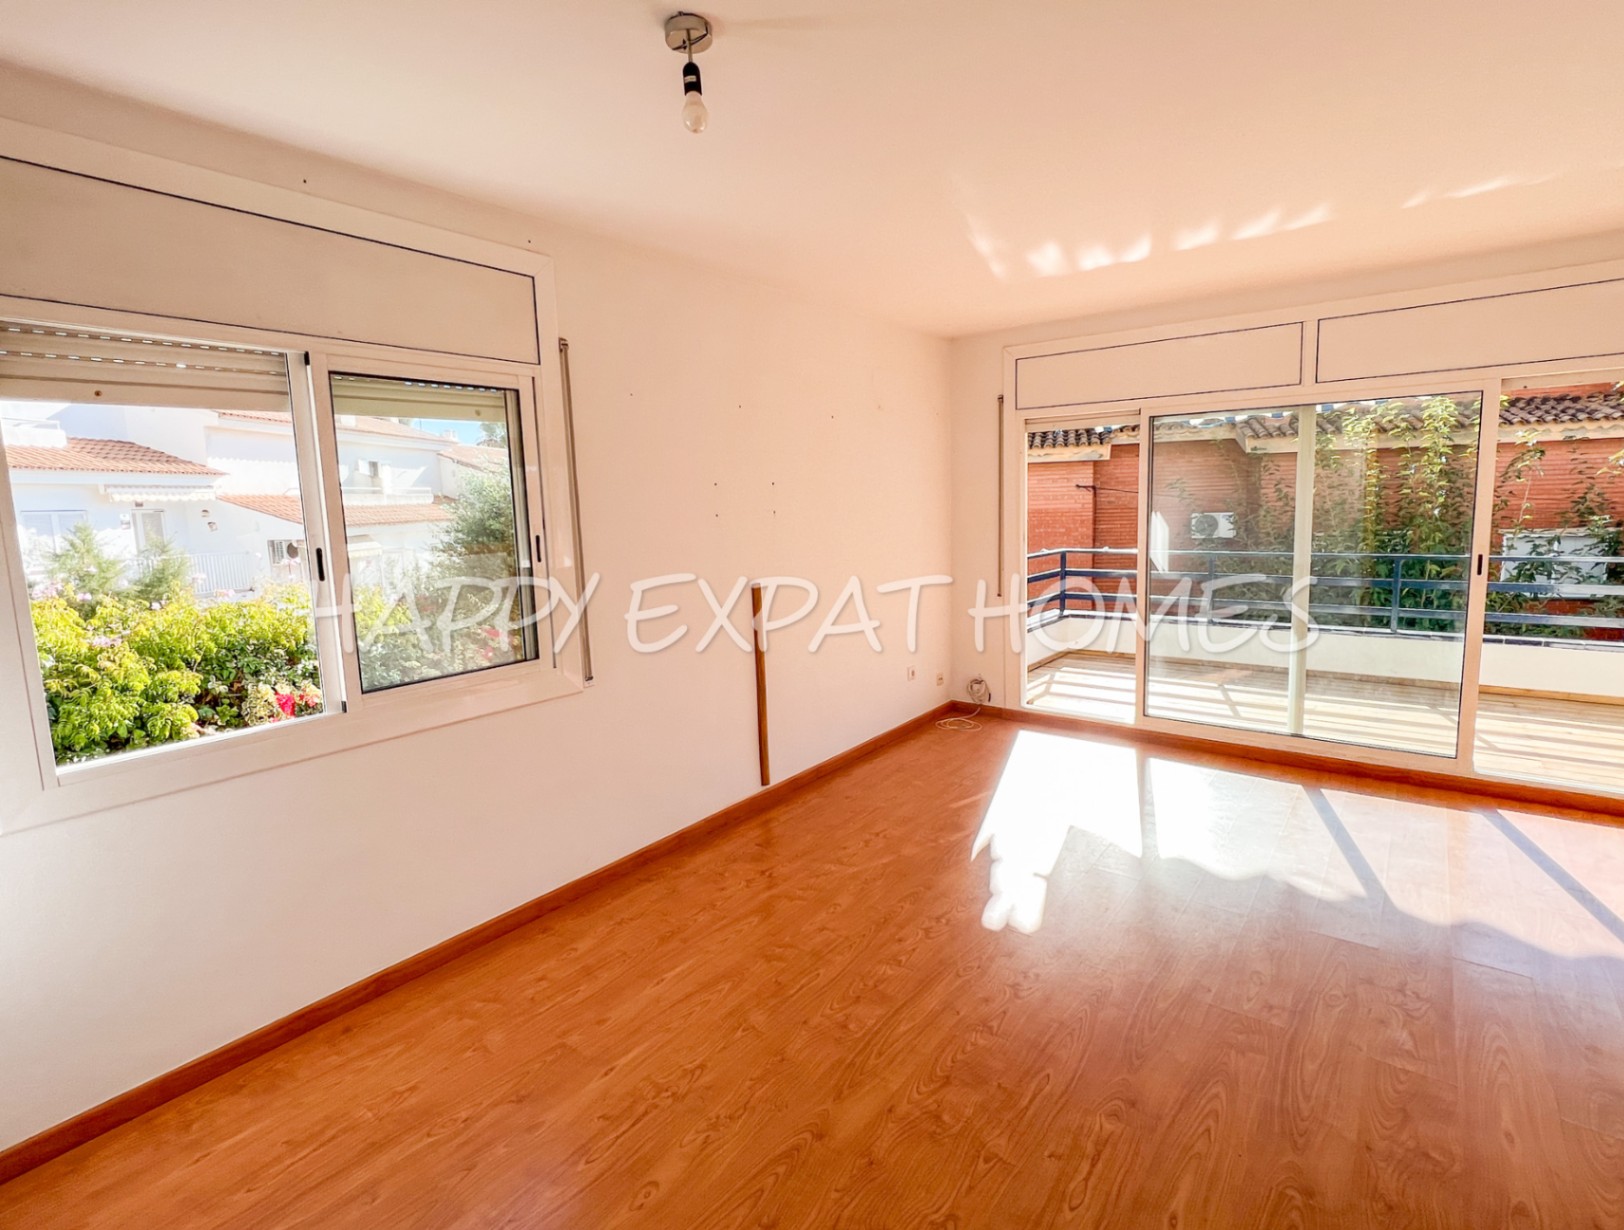 3-bedrooms flat with seaview close to Sitges Port